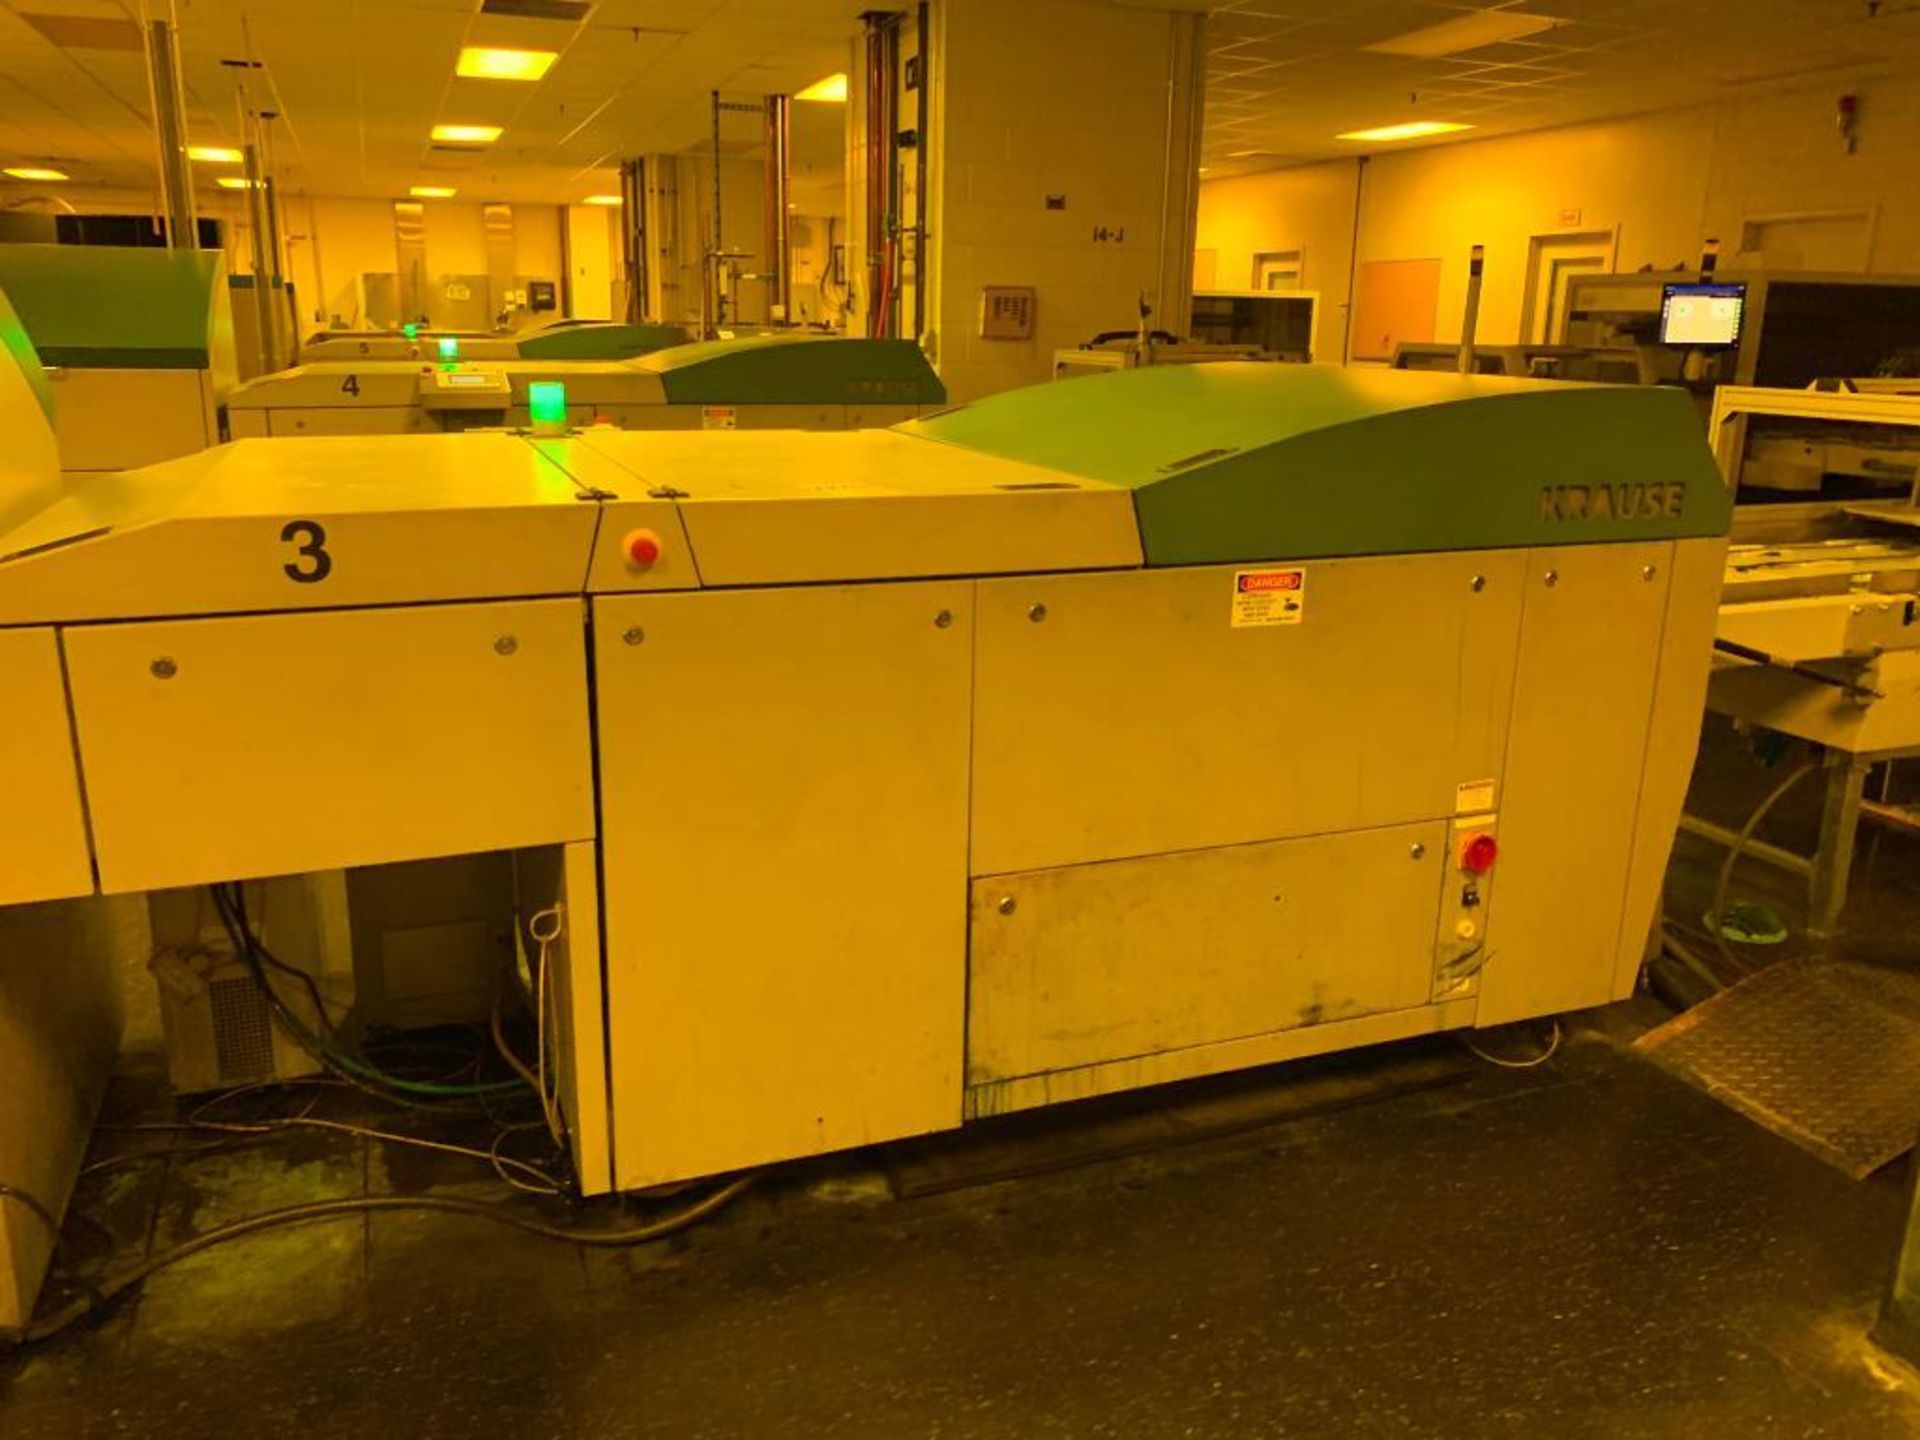 2008 Krause LS Jet Multi Format Plate Setter Line, Krause Bluefin High Performance Polymer Plate Pro - Image 9 of 16